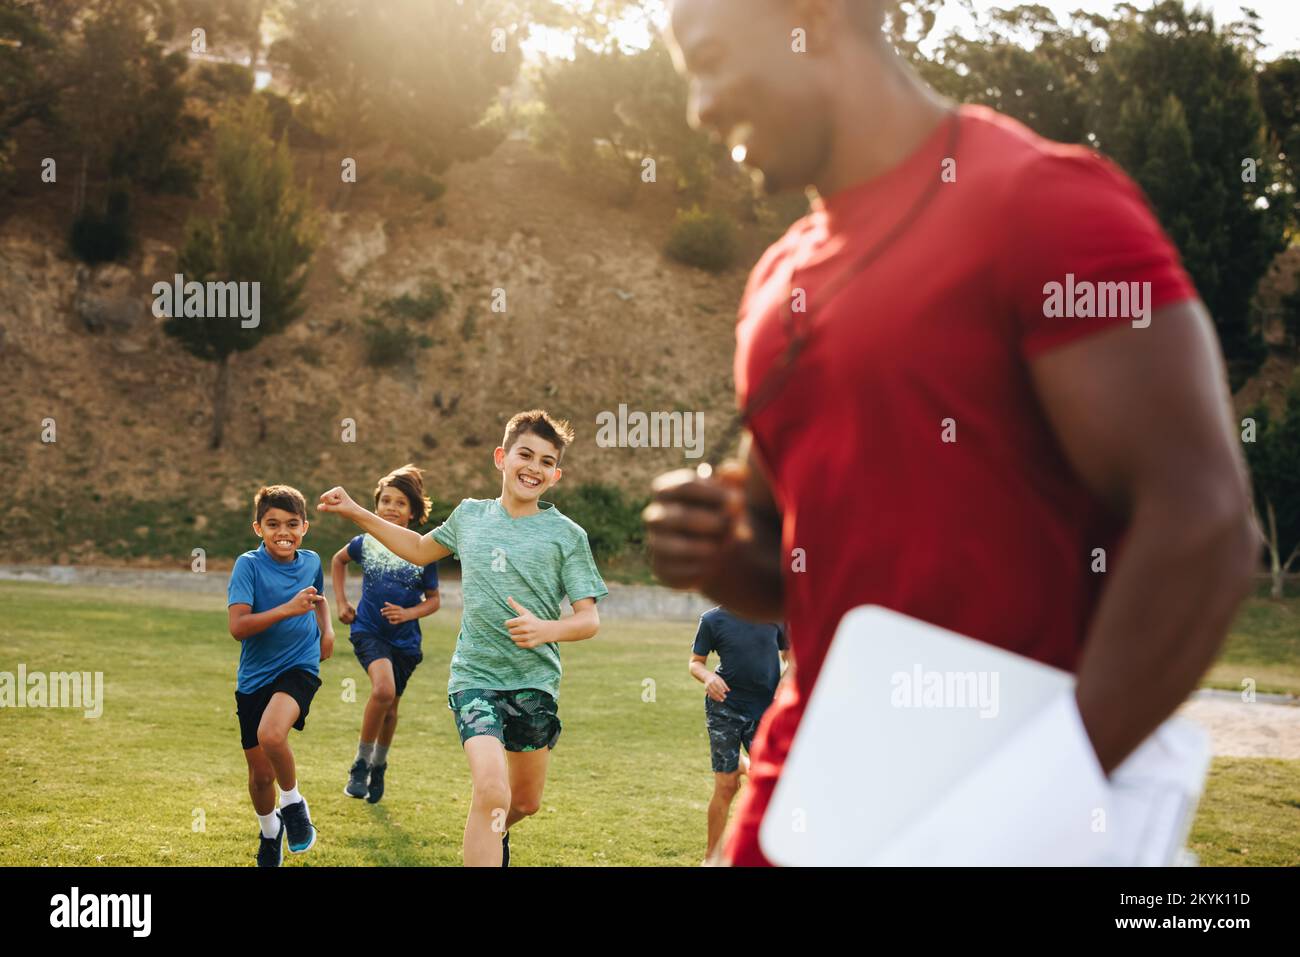 Children running on a school ground during PE. Group of elementary school kids having a physical education session with their coach. Fun sports traini Stock Photo